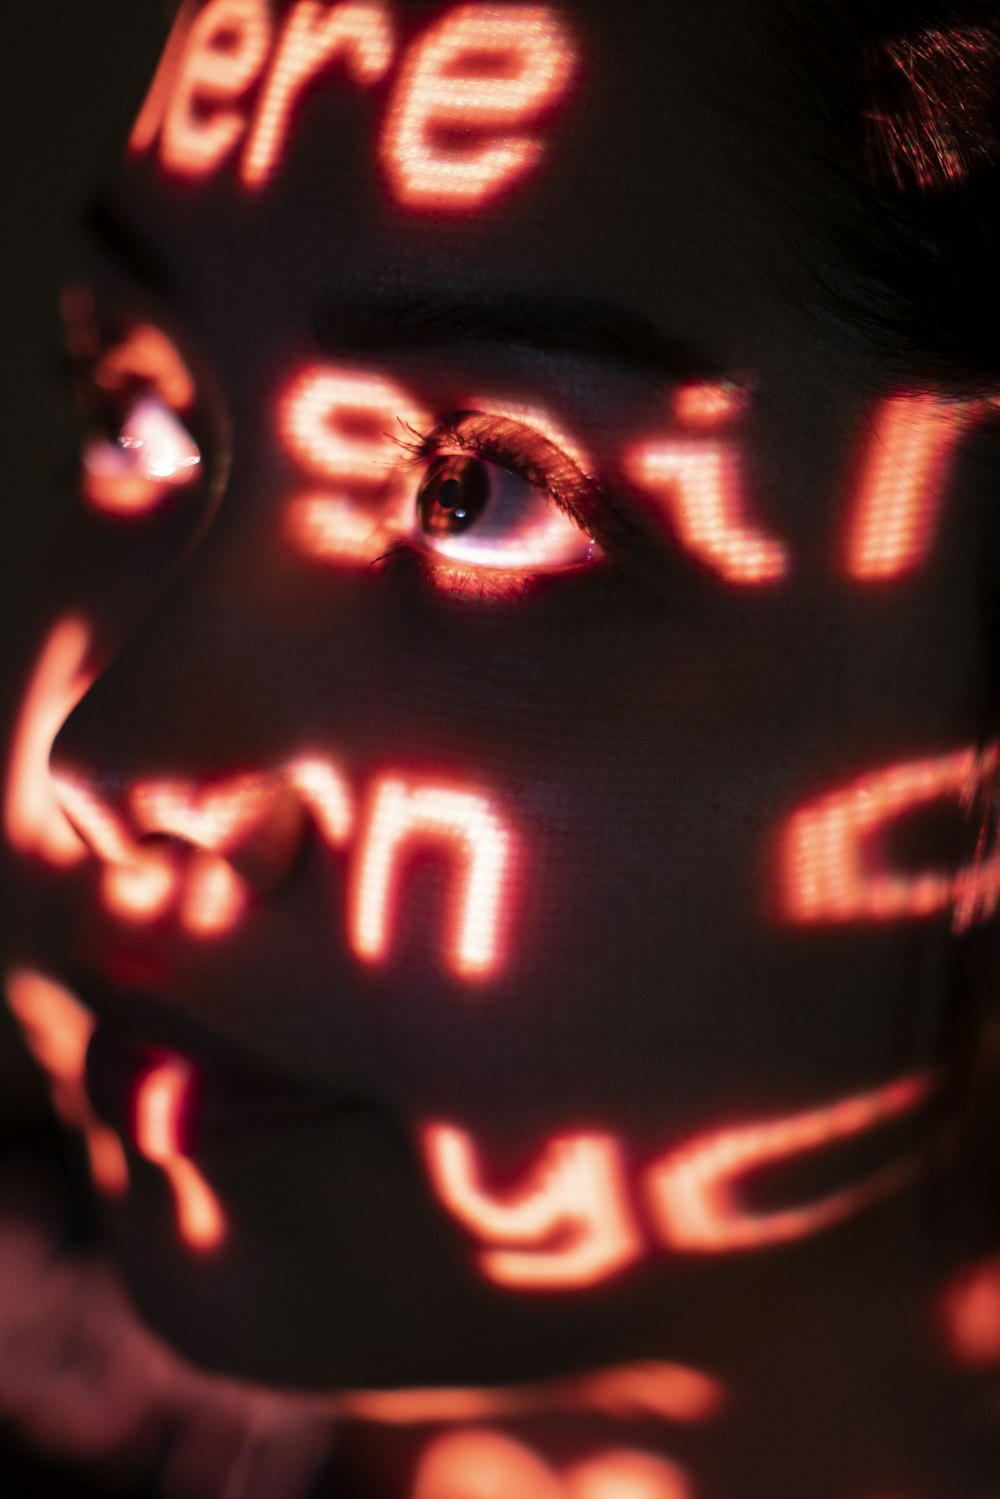 a woman's face with glowing words projected on it